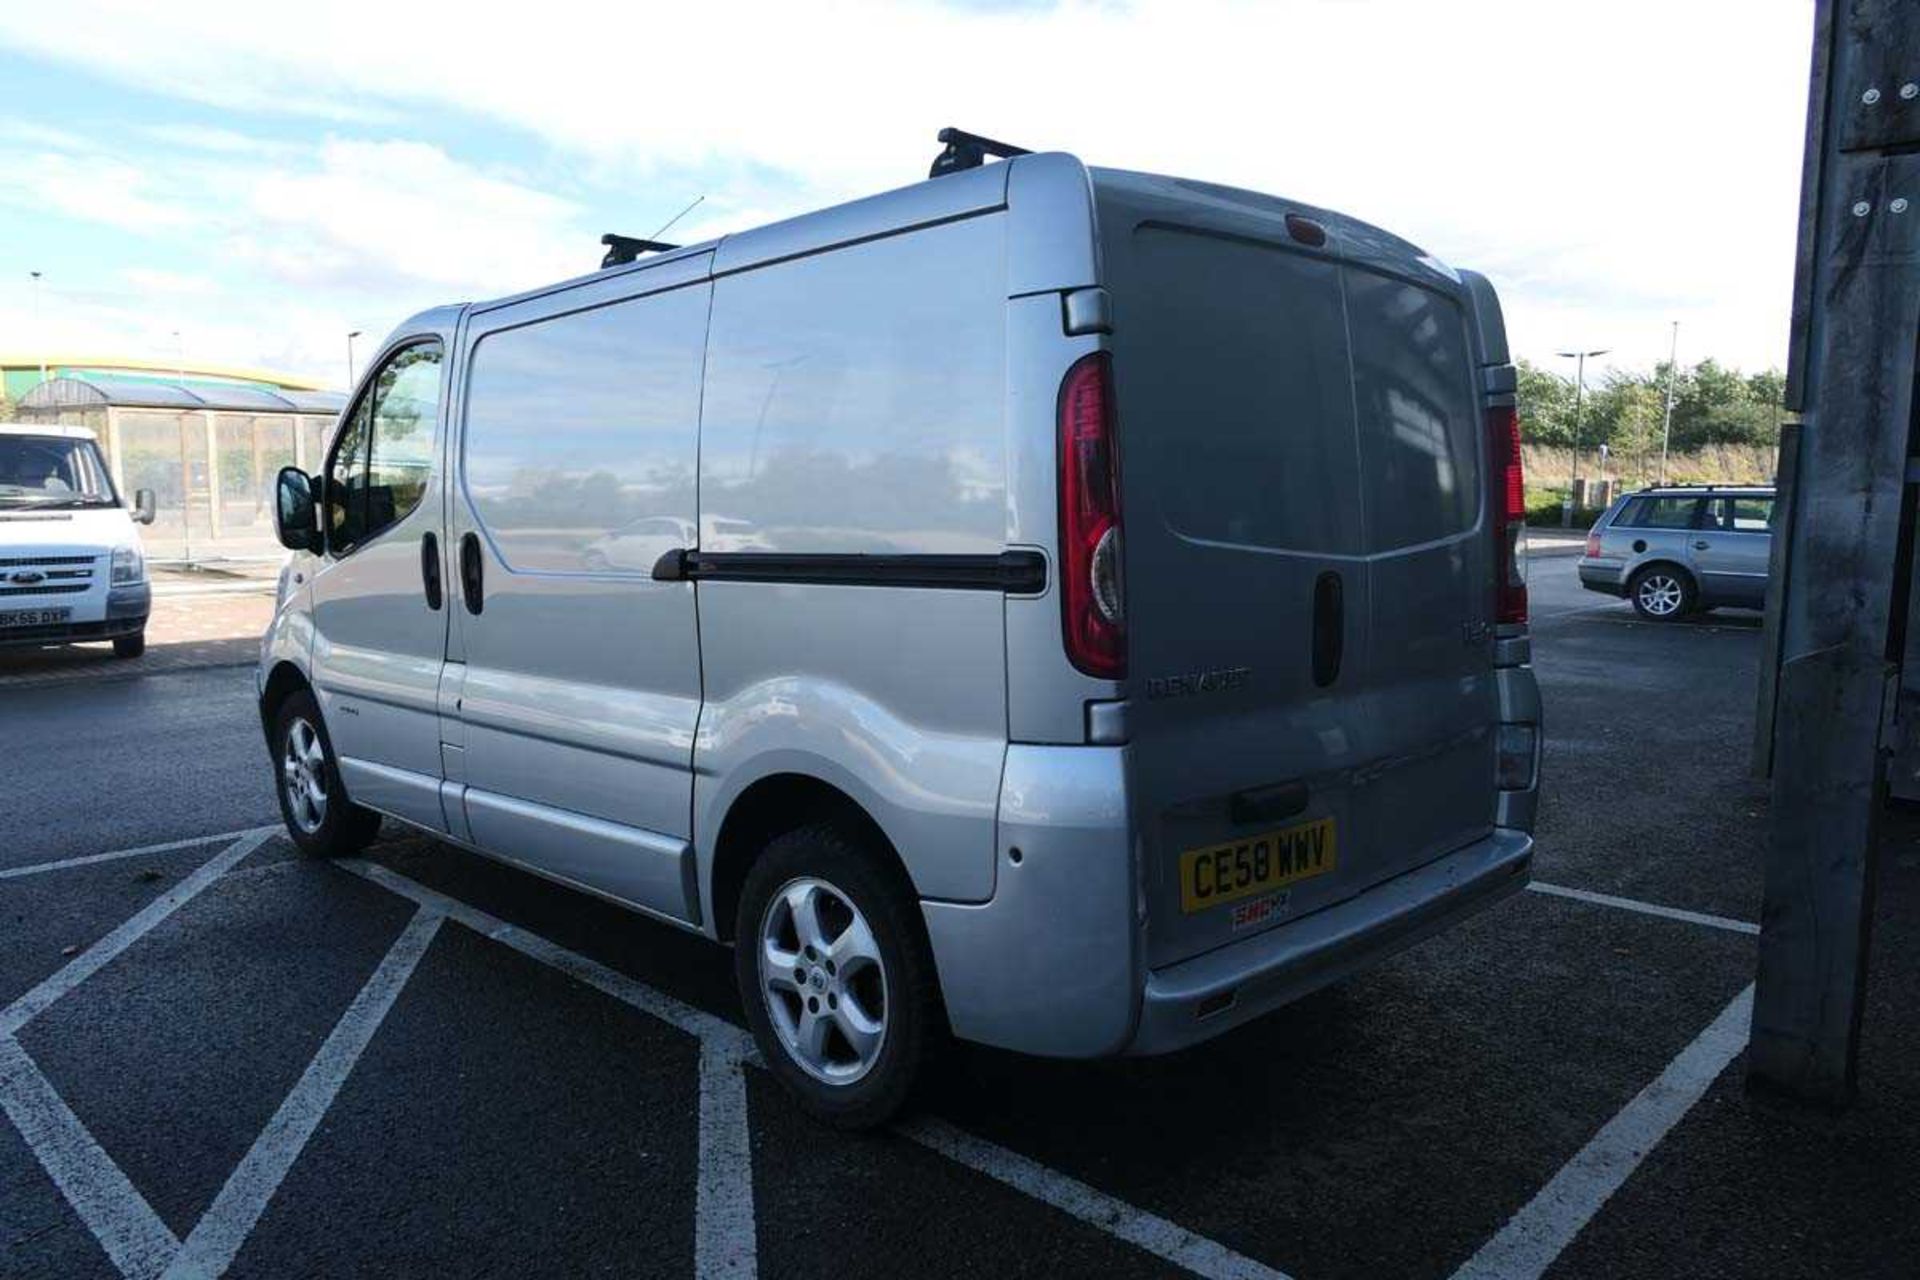 (CE58 WWV) Renault Trafic SL27 Sport DCI 115 panel van in silver, first registered 27/09/2008, - Image 5 of 12